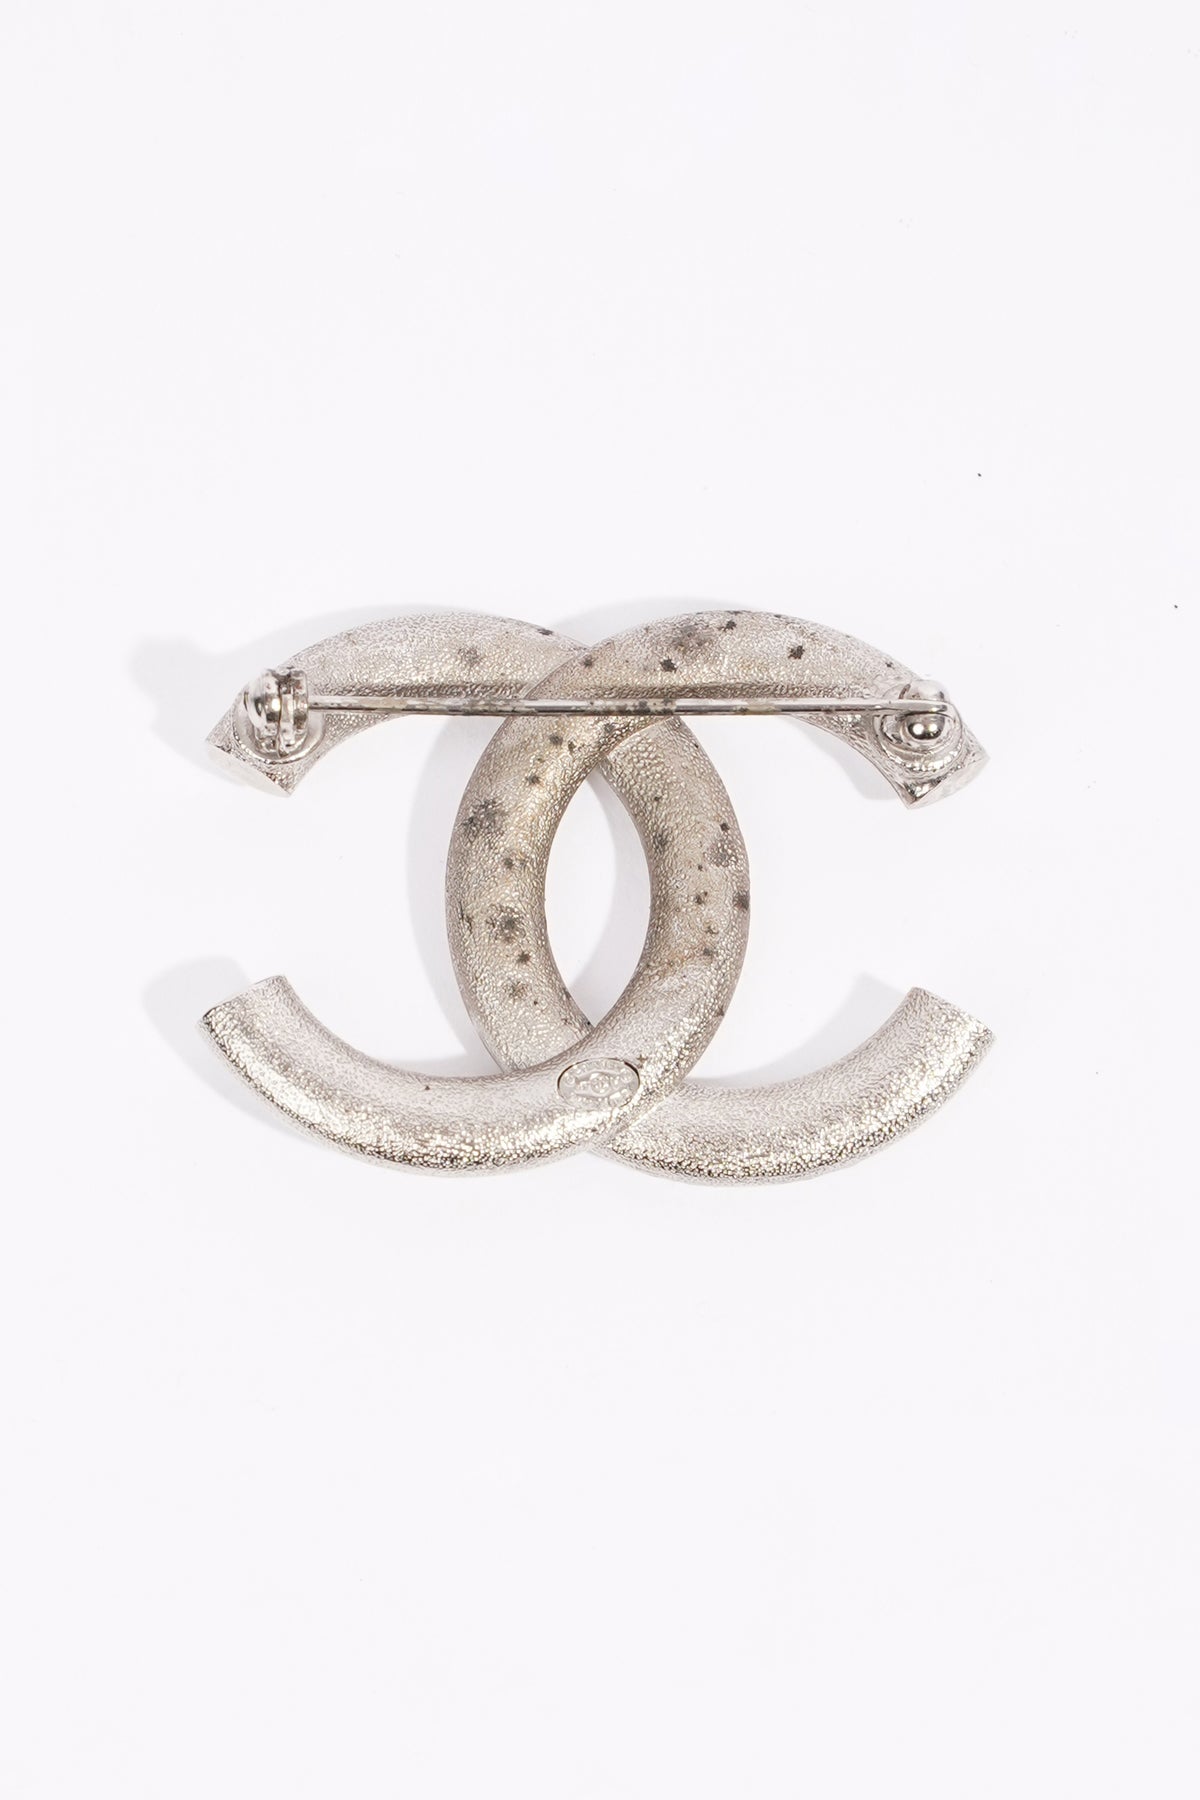 Chanel Silver Metal XXL Openwork Chain CC Brooch, 2006, Contemporary Jewelry (Like New)